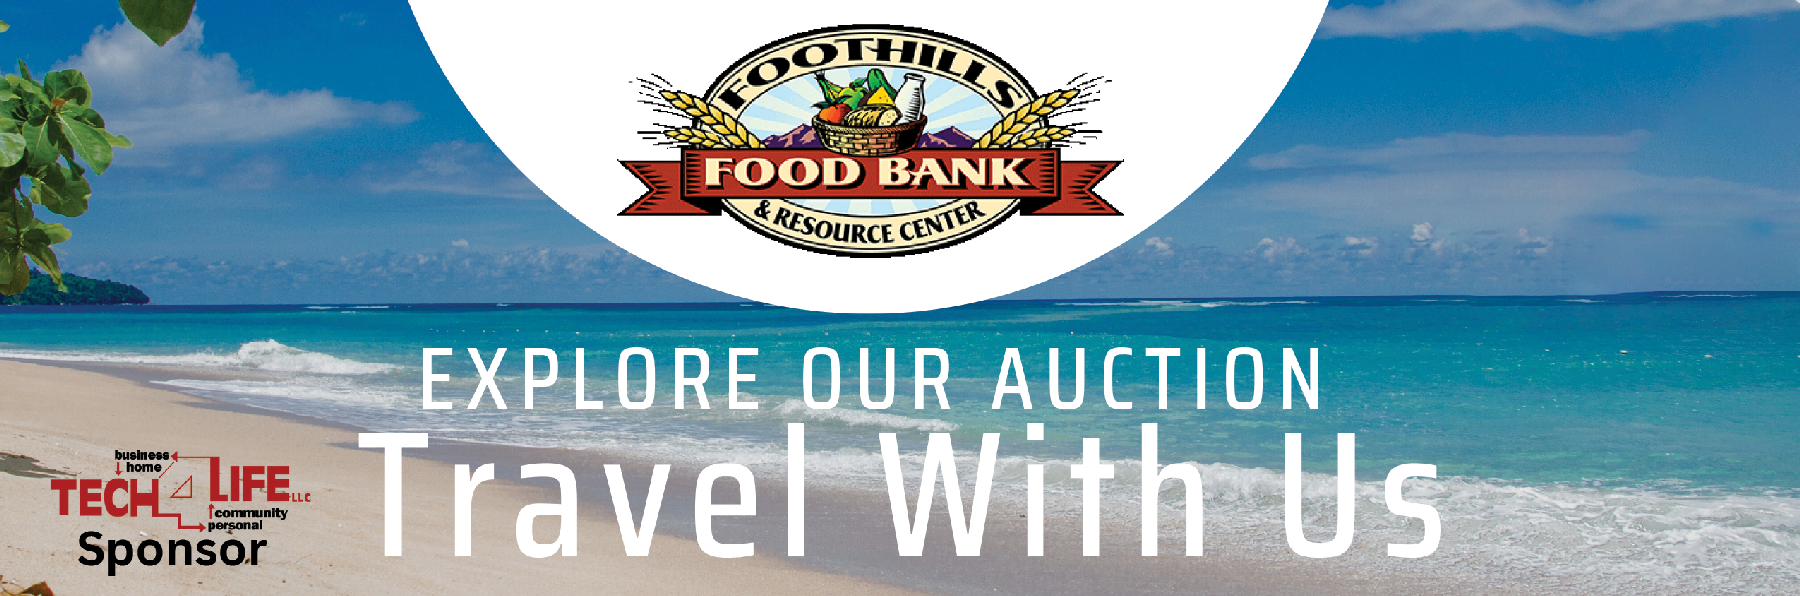 Foothills Food Bank Online Auction